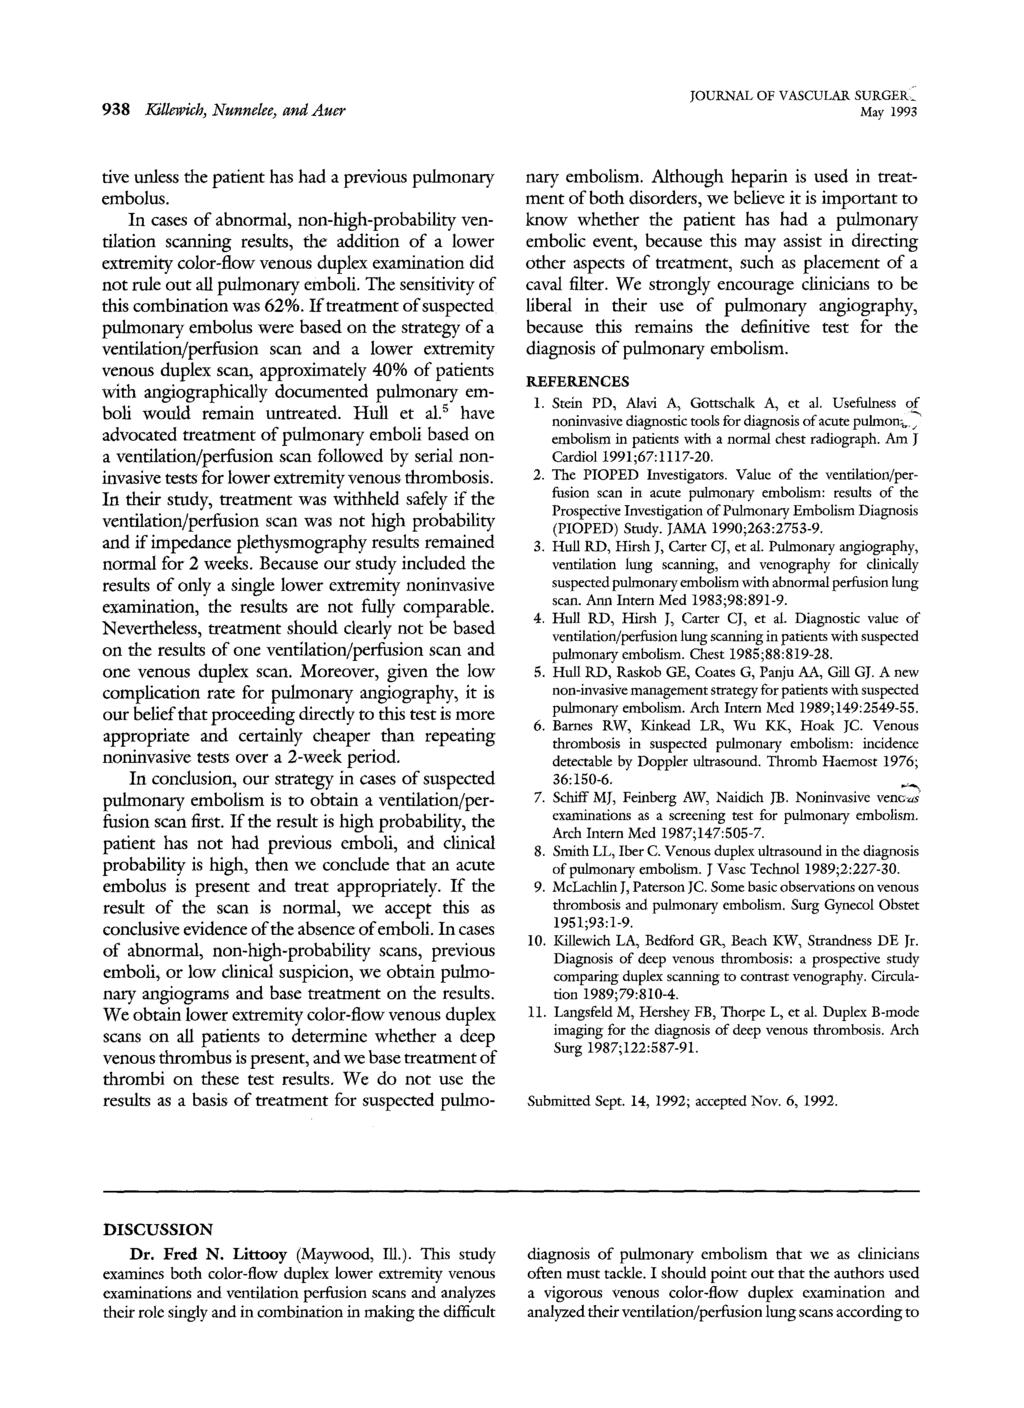 JOURNAL OF VASCULAR SURGER~ 938 Killewich, Nunnelee, and Auer May 1993 five unless the patient has had a previous pulmonary embolus.